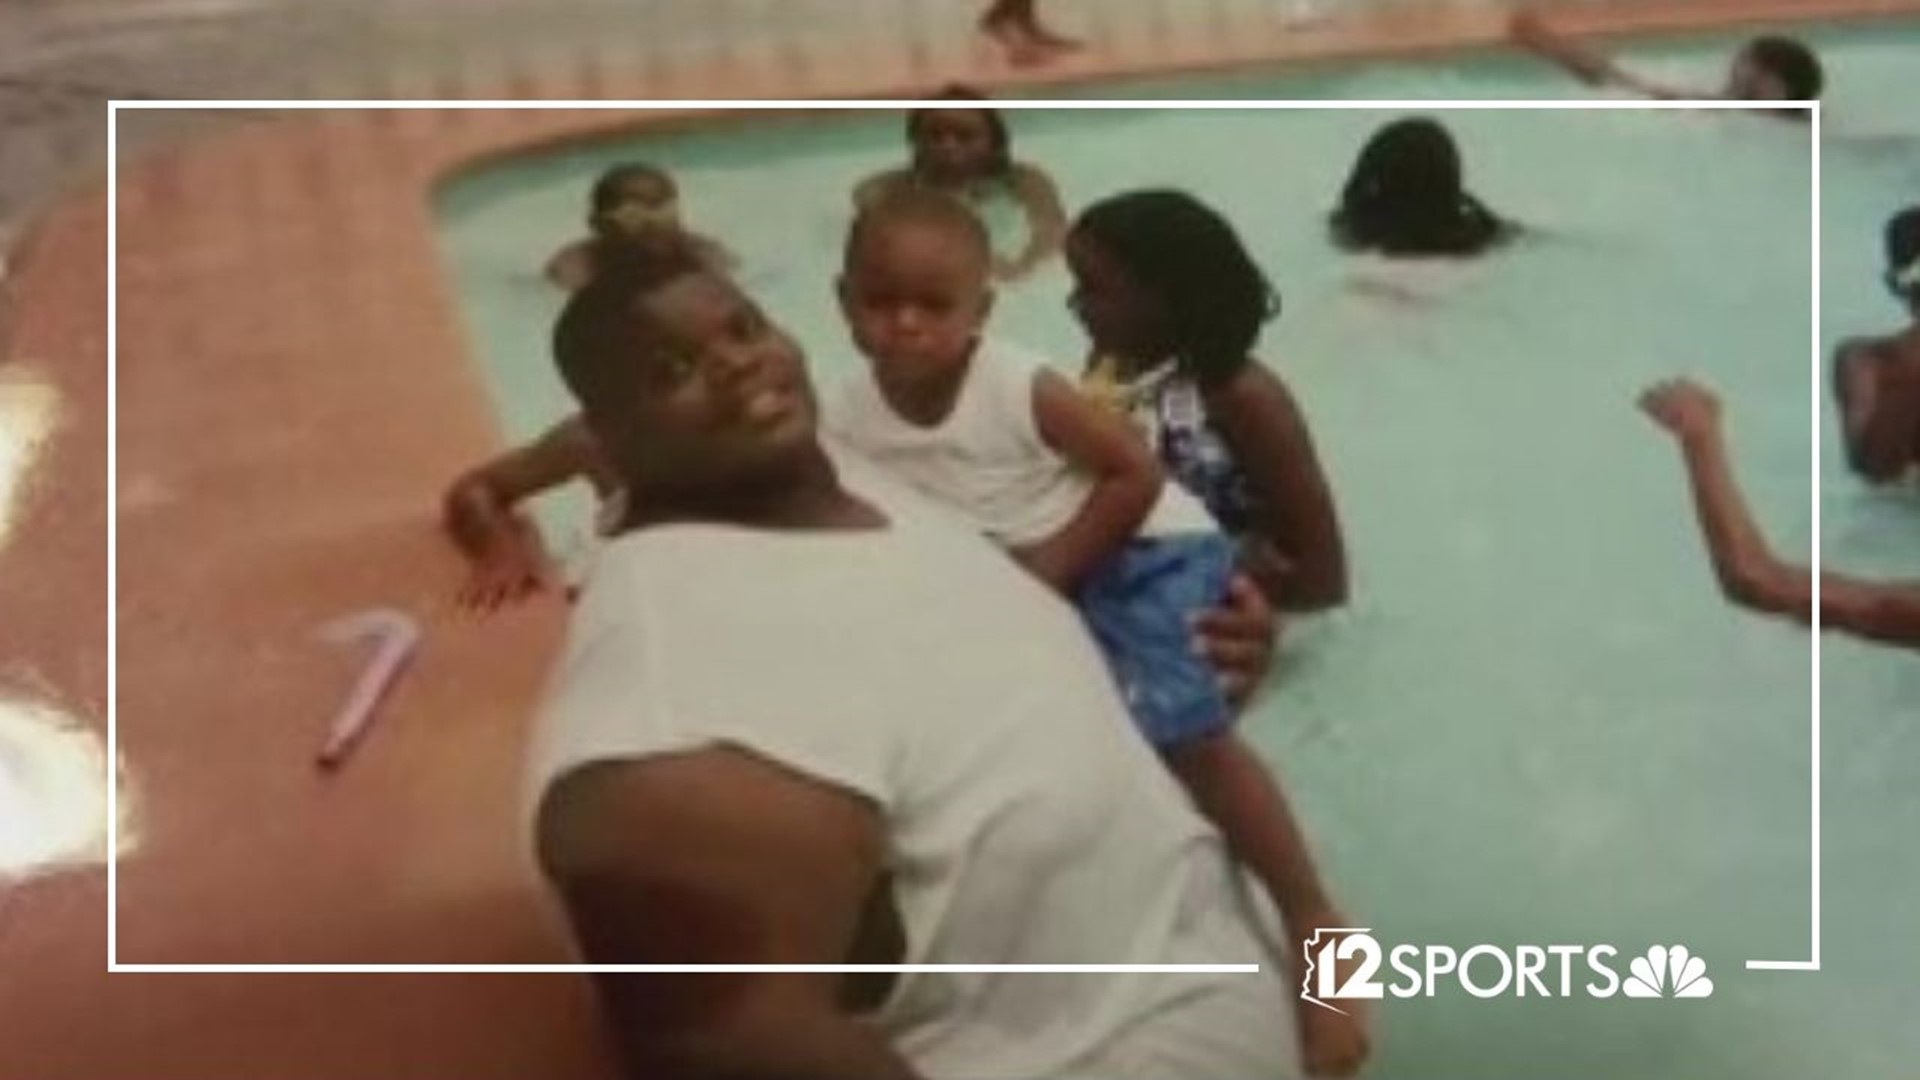 In the Taylor household, family is a top priority. See how Alphonso Taylor Jr. is stepping up to help his father through a medical issue. Cam Cox has the story.